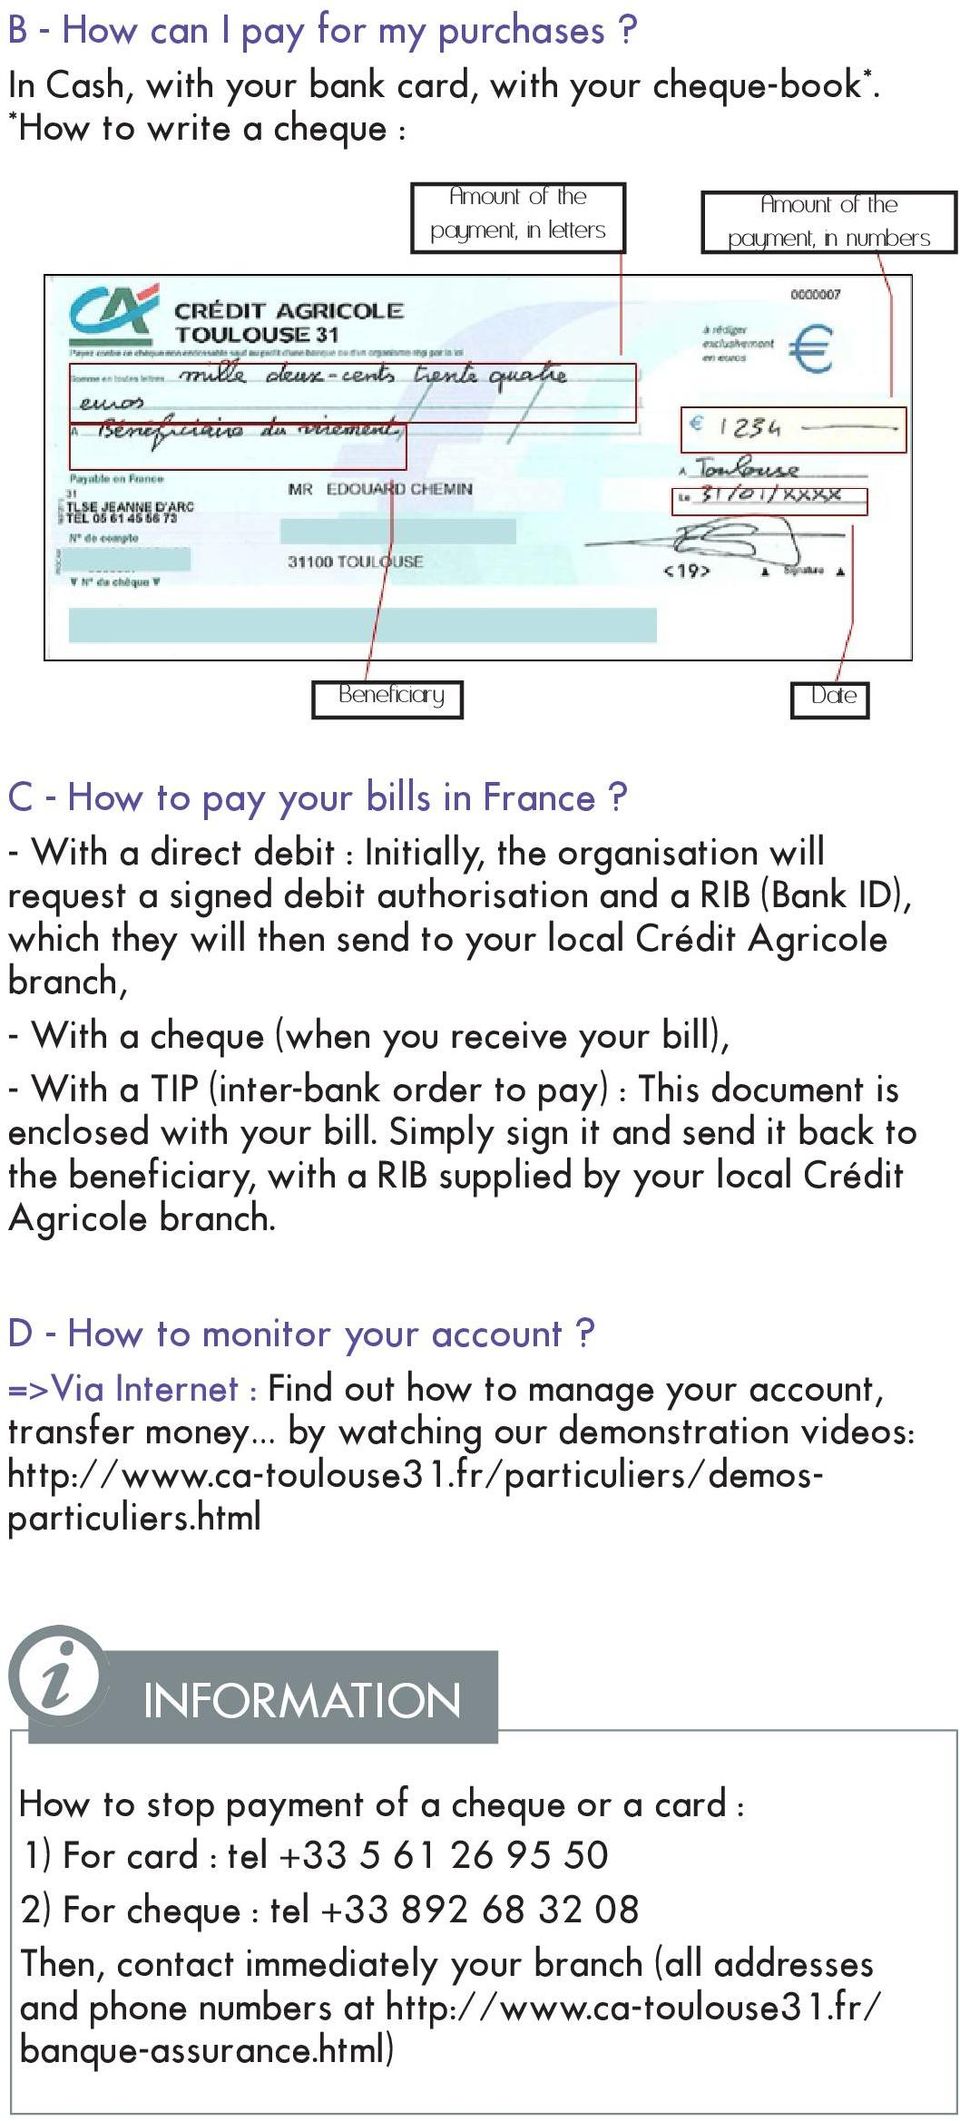 - With a direct debit : Initially, the organisation will request a signed debit authorisation and a RIB (Bank ID), which they will then send to your local Crédit Agricole branch, - With a cheque